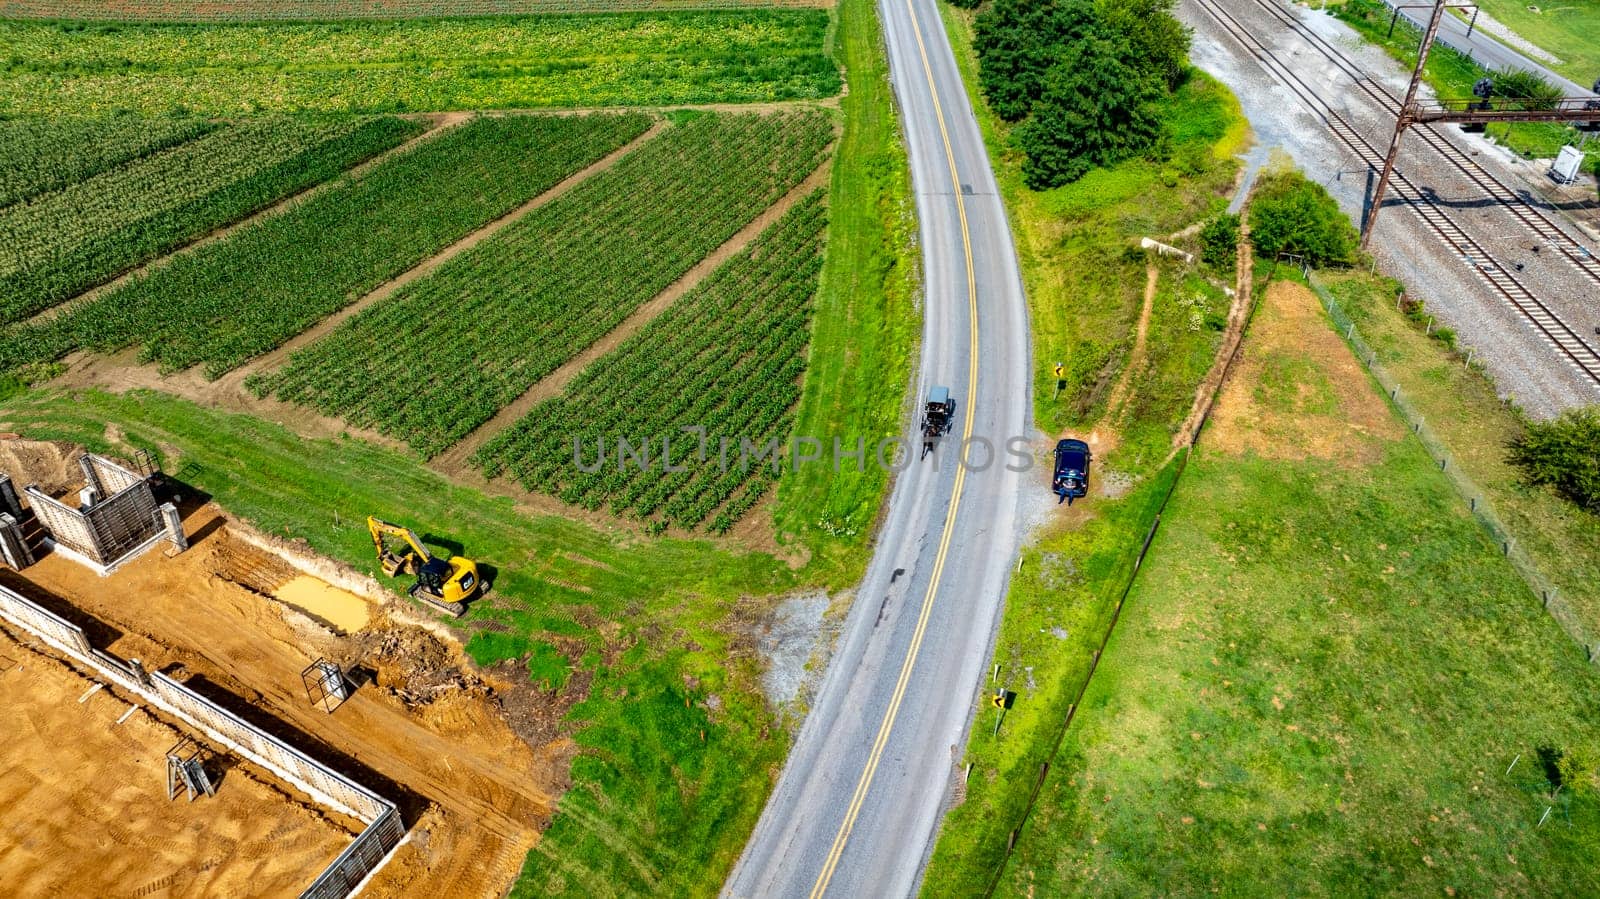 An Aerial View of Farmland with an Amish Horse and Buggy, on Road, with Railway, and Construction Site